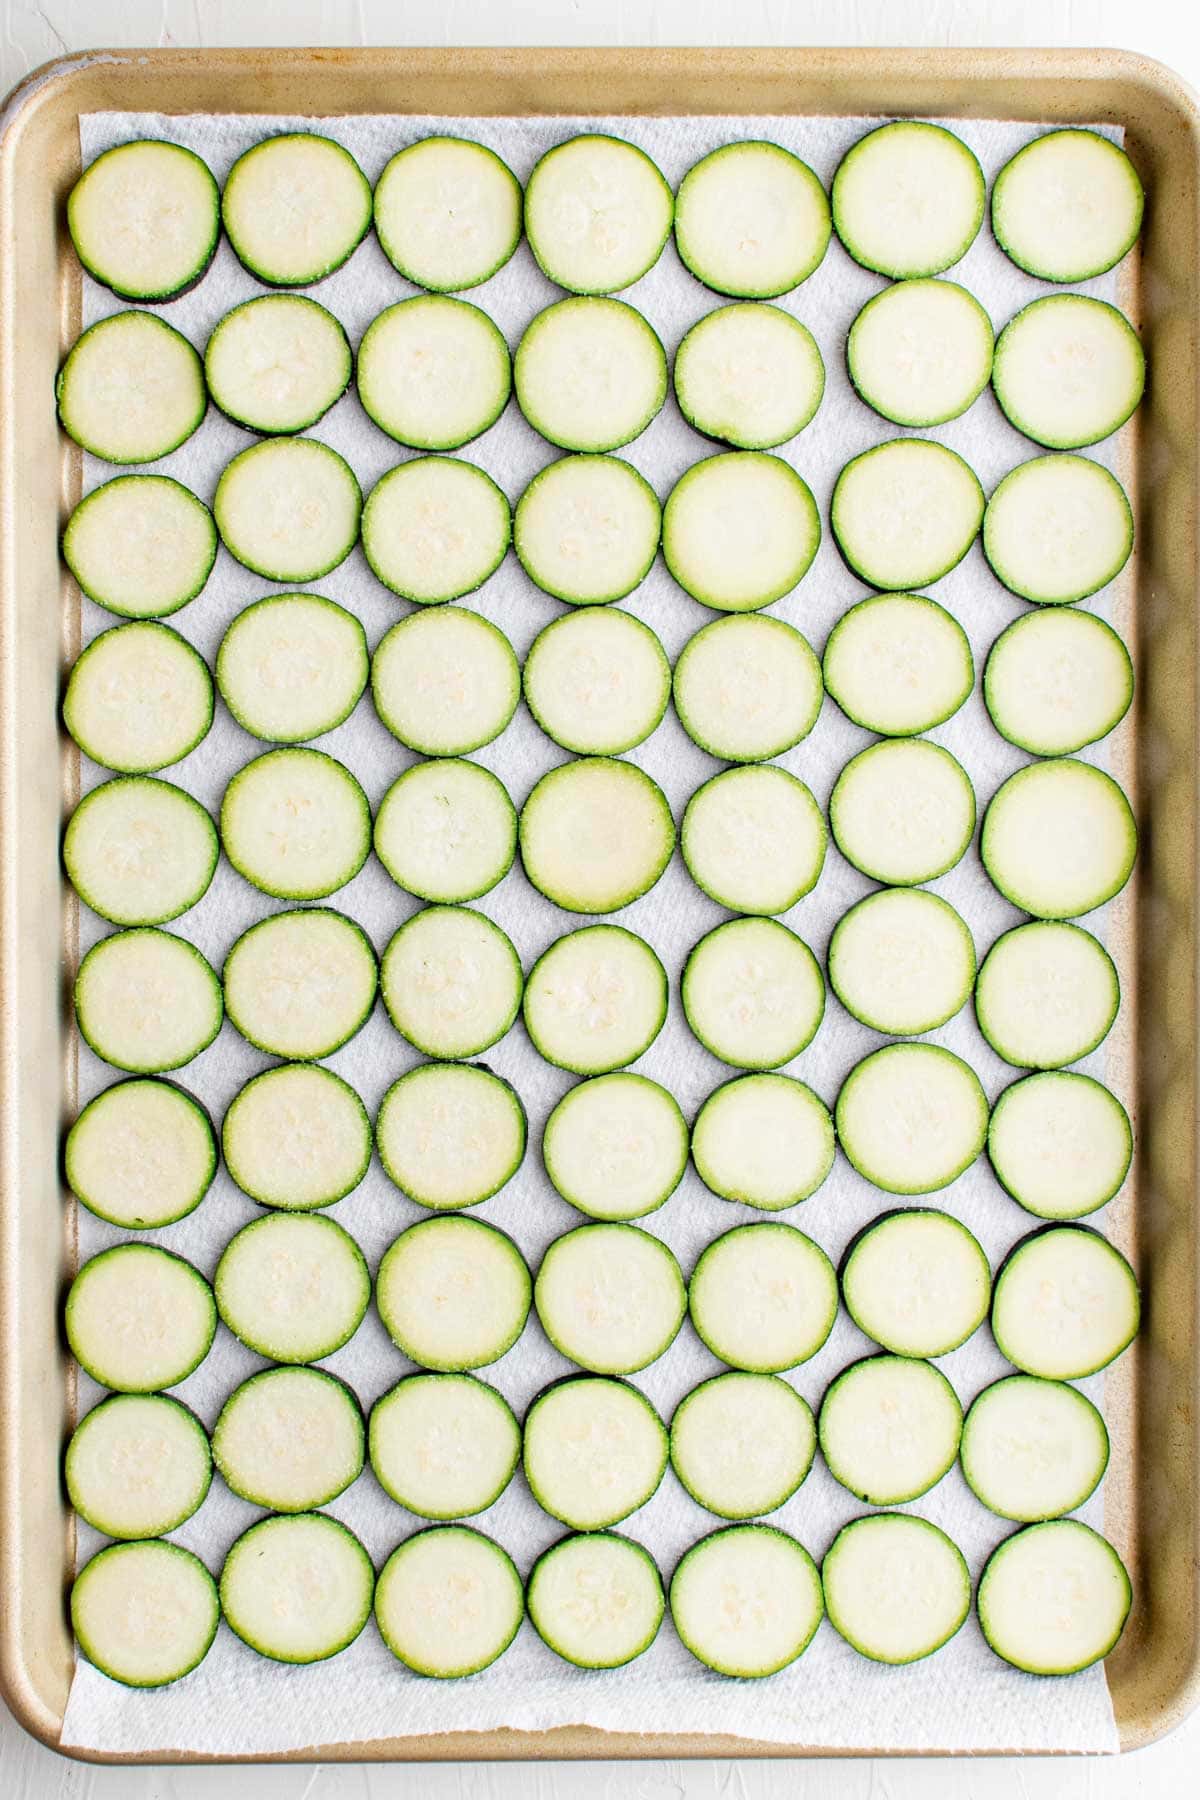 slices of zucchini on a baking sheet